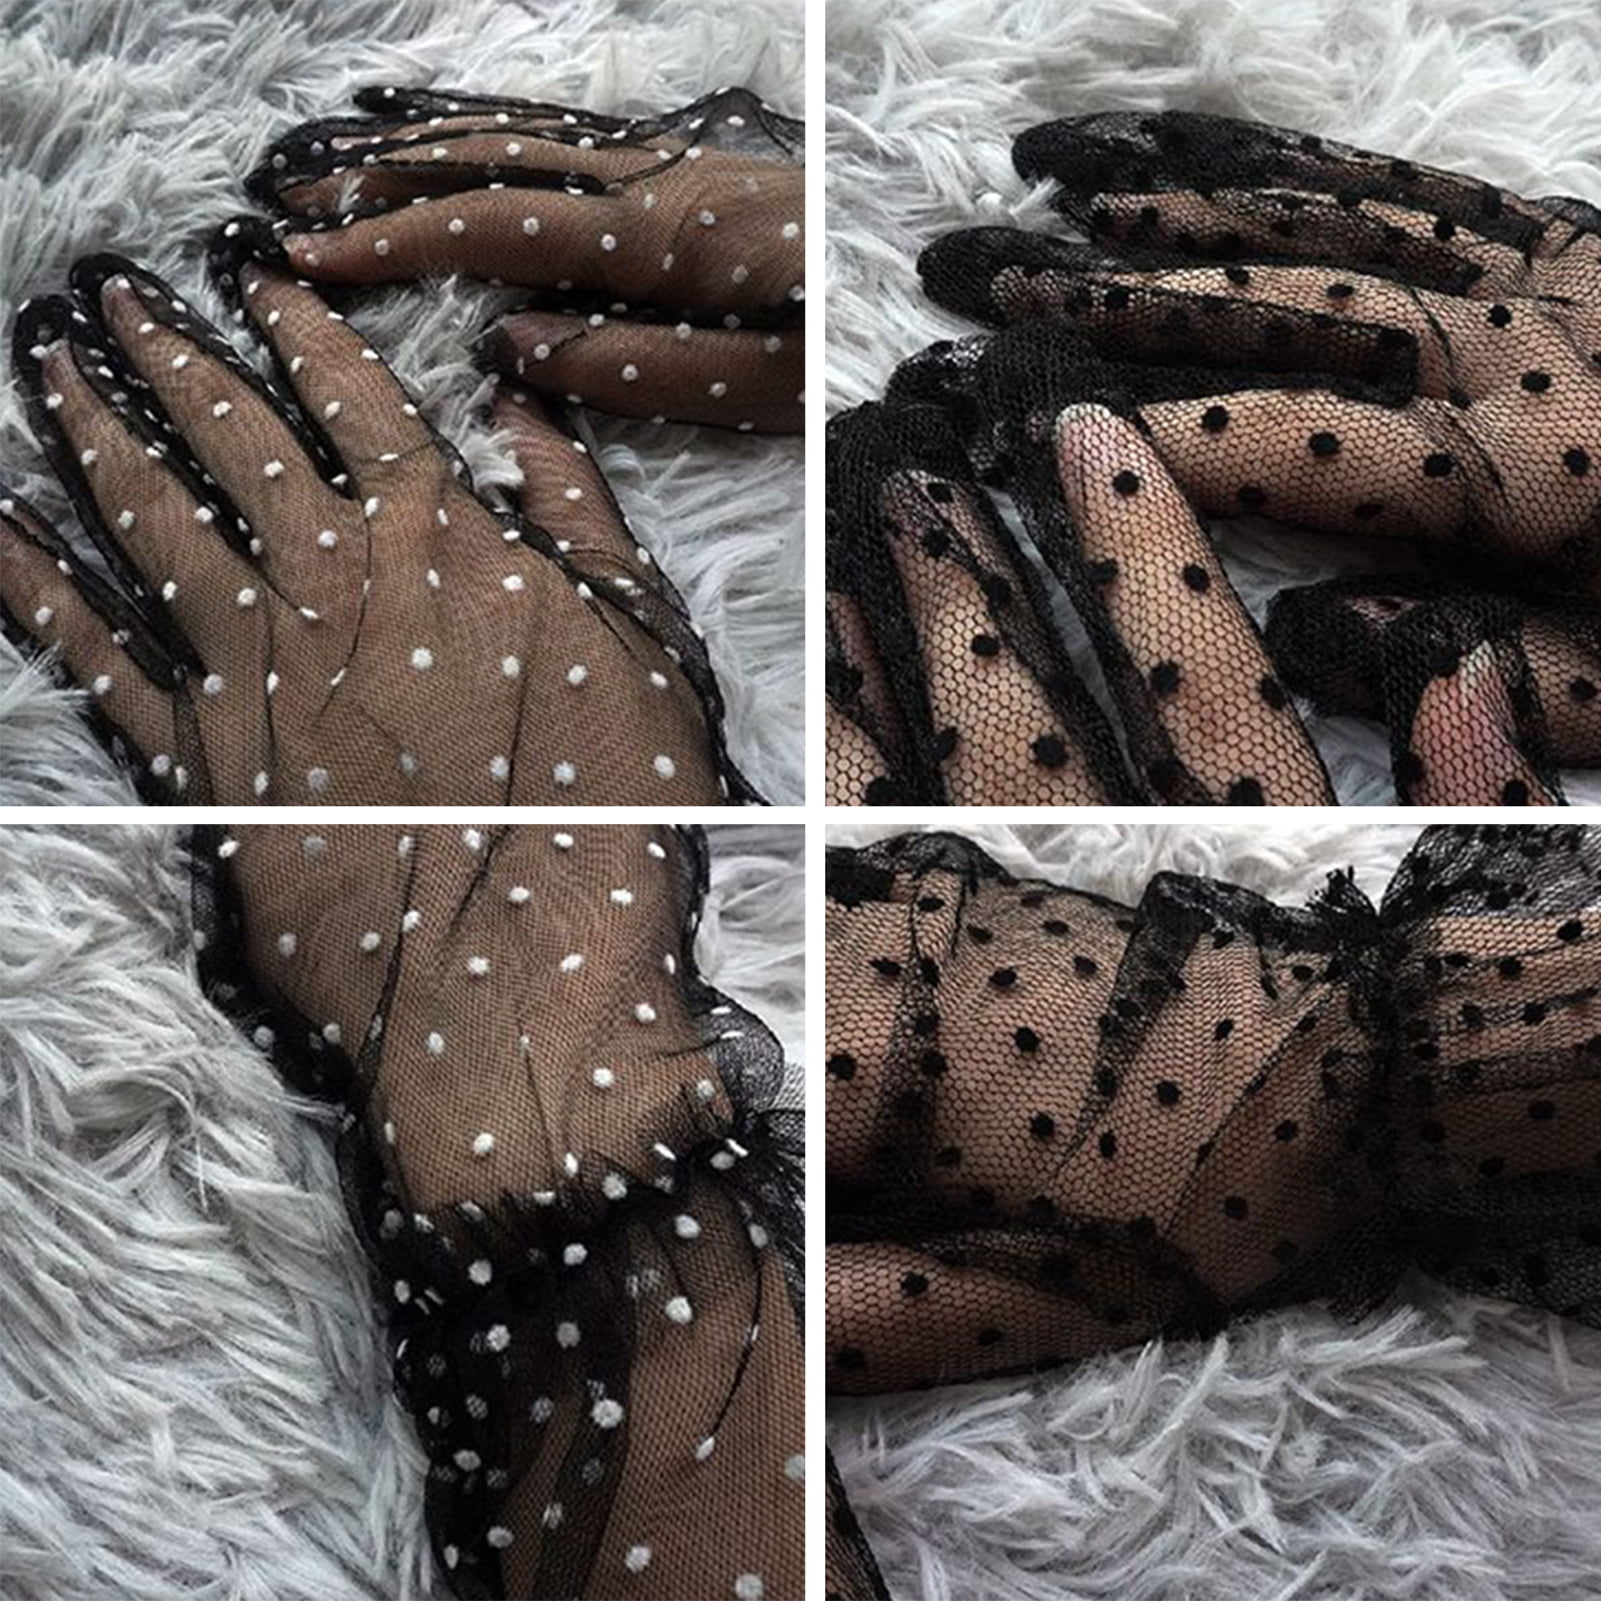 Designer Black Tulle Black Lace Gloves For Women With Embroidered Letters  Print, Lace Detailing, And Thin Fabric Perfect For Driving, Parties, Or  Fashion Available In 2 Sizes From Fashionladies2007, $14.96